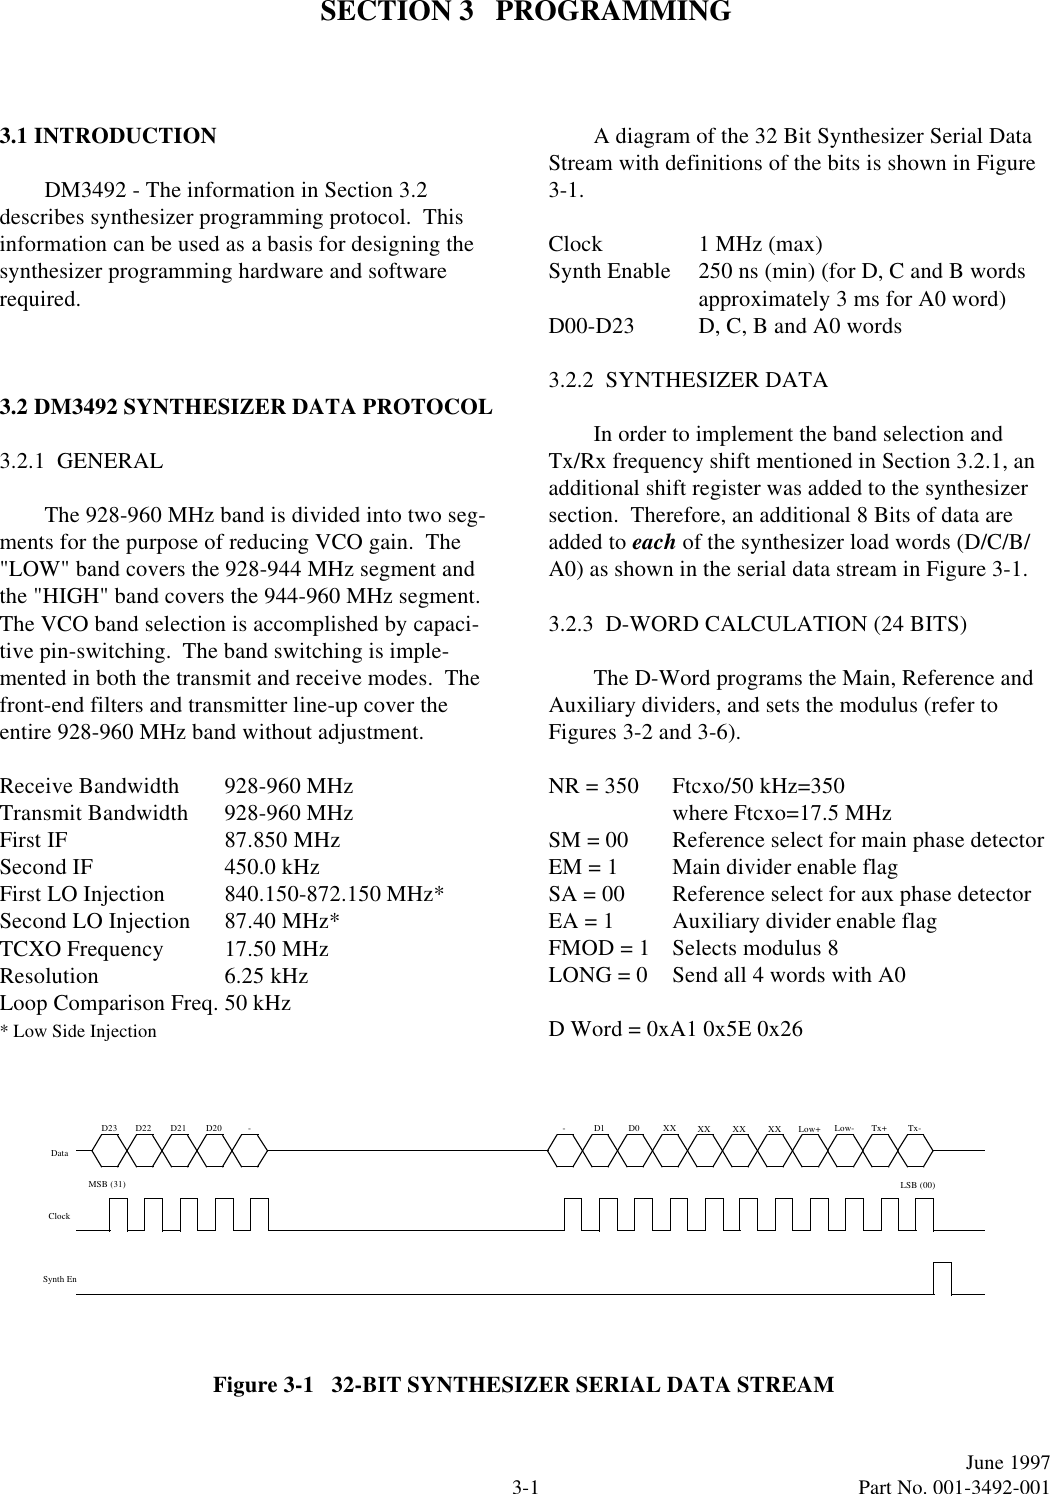 3-1June 1997  Part No. 001-3492-001SECTION 3   PROGRAMMING3.1 INTRODUCTIONDM3492 - The information in Section 3.2 describes synthesizer programming protocol.  This information can be used as a basis for designing the synthesizer programming hardware and software required.3.2 DM3492 SYNTHESIZER DATA PROTOCOL3.2.1  GENERALThe 928-960 MHz band is divided into two seg-ments for the purpose of reducing VCO gain.  The &quot;LOW&quot; band covers the 928-944 MHz segment and the &quot;HIGH&quot; band covers the 944-960 MHz segment.  The VCO band selection is accomplished by capaci-tive pin-switching.  The band switching is imple-mented in both the transmit and receive modes.  The front-end filters and transmitter line-up cover the entire 928-960 MHz band without adjustment.Receive Bandwidth 928-960 MHzTransmit Bandwidth 928-960 MHzFirst IF 87.850 MHzSecond IF 450.0 kHzFirst LO Injection 840.150-872.150 MHz*Second LO Injection 87.40 MHz*TCXO Frequency 17.50 MHzResolution 6.25 kHzLoop Comparison Freq. 50 kHz* Low Side InjectionA diagram of the 32 Bit Synthesizer Serial Data Stream with definitions of the bits is shown in Figure 3-1.Clock 1 MHz (max)Synth Enable 250 ns (min) (for D, C and B wordsapproximately 3 ms for A0 word)D00-D23 D, C, B and A0 words3.2.2  SYNTHESIZER DATAIn order to implement the band selection and Tx/Rx frequency shift mentioned in Section 3.2.1, an additional shift register was added to the synthesizer section.  Therefore, an additional 8 Bits of data are added to each of the synthesizer load words (D/C/B/A0) as shown in the serial data stream in Figure 3-1.3.2.3  D-WORD CALCULATION (24 BITS)The D-Word programs the Main, Reference and Auxiliary dividers, and sets the modulus (refer to Figures 3-2 and 3-6).NR = 350 Ftcxo/50 kHz=350 where Ftcxo=17.5 MHzSM = 00 Reference select for main phase detectorEM = 1 Main divider enable flagSA = 00 Reference select for aux phase detectorEA = 1 Auxiliary divider enable flagFMOD = 1 Selects modulus 8LONG = 0 Send all 4 words with A0D Word = 0xA1 0x5E 0x26Figure 3-1   32-BIT SYNTHESIZER SERIAL DATA STREAMD1 D0 XXXXXX XXLSB (00)DataClockSynth EnMSB (31)D23 D22 D21 D20 - - Tx-Tx+Low-Low+